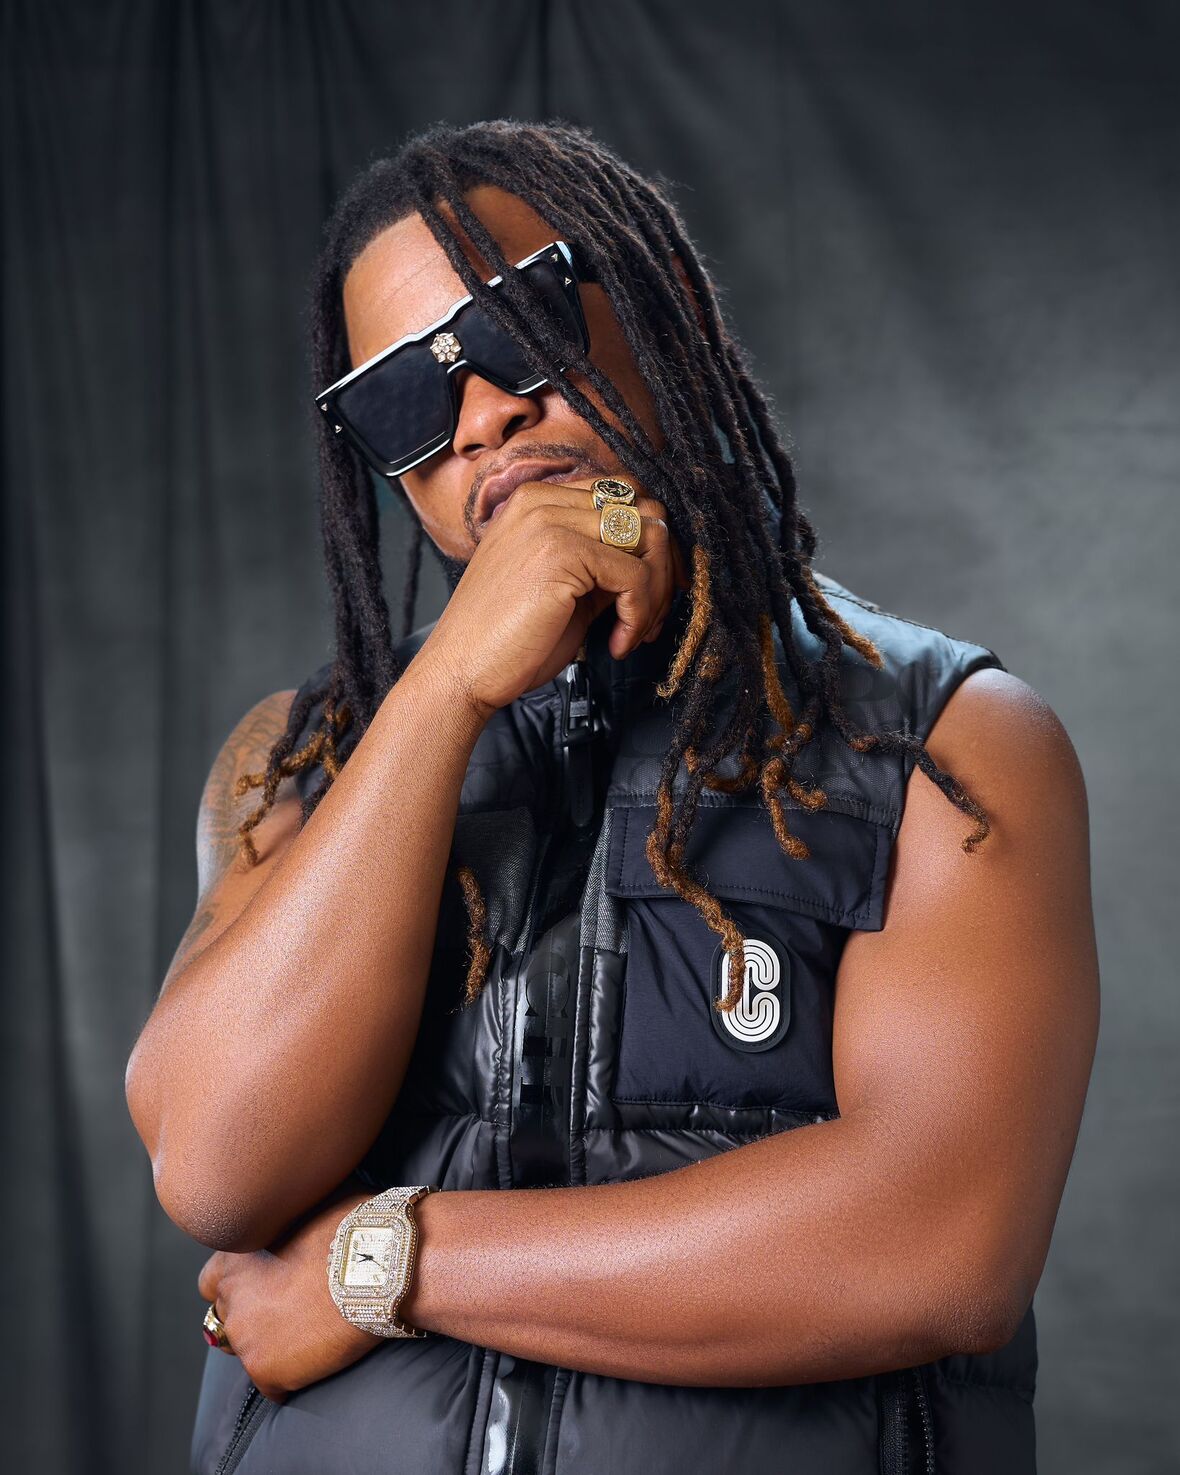 Dancehall Artist Shawn Ice Says New Year is One of ‘Elevation’